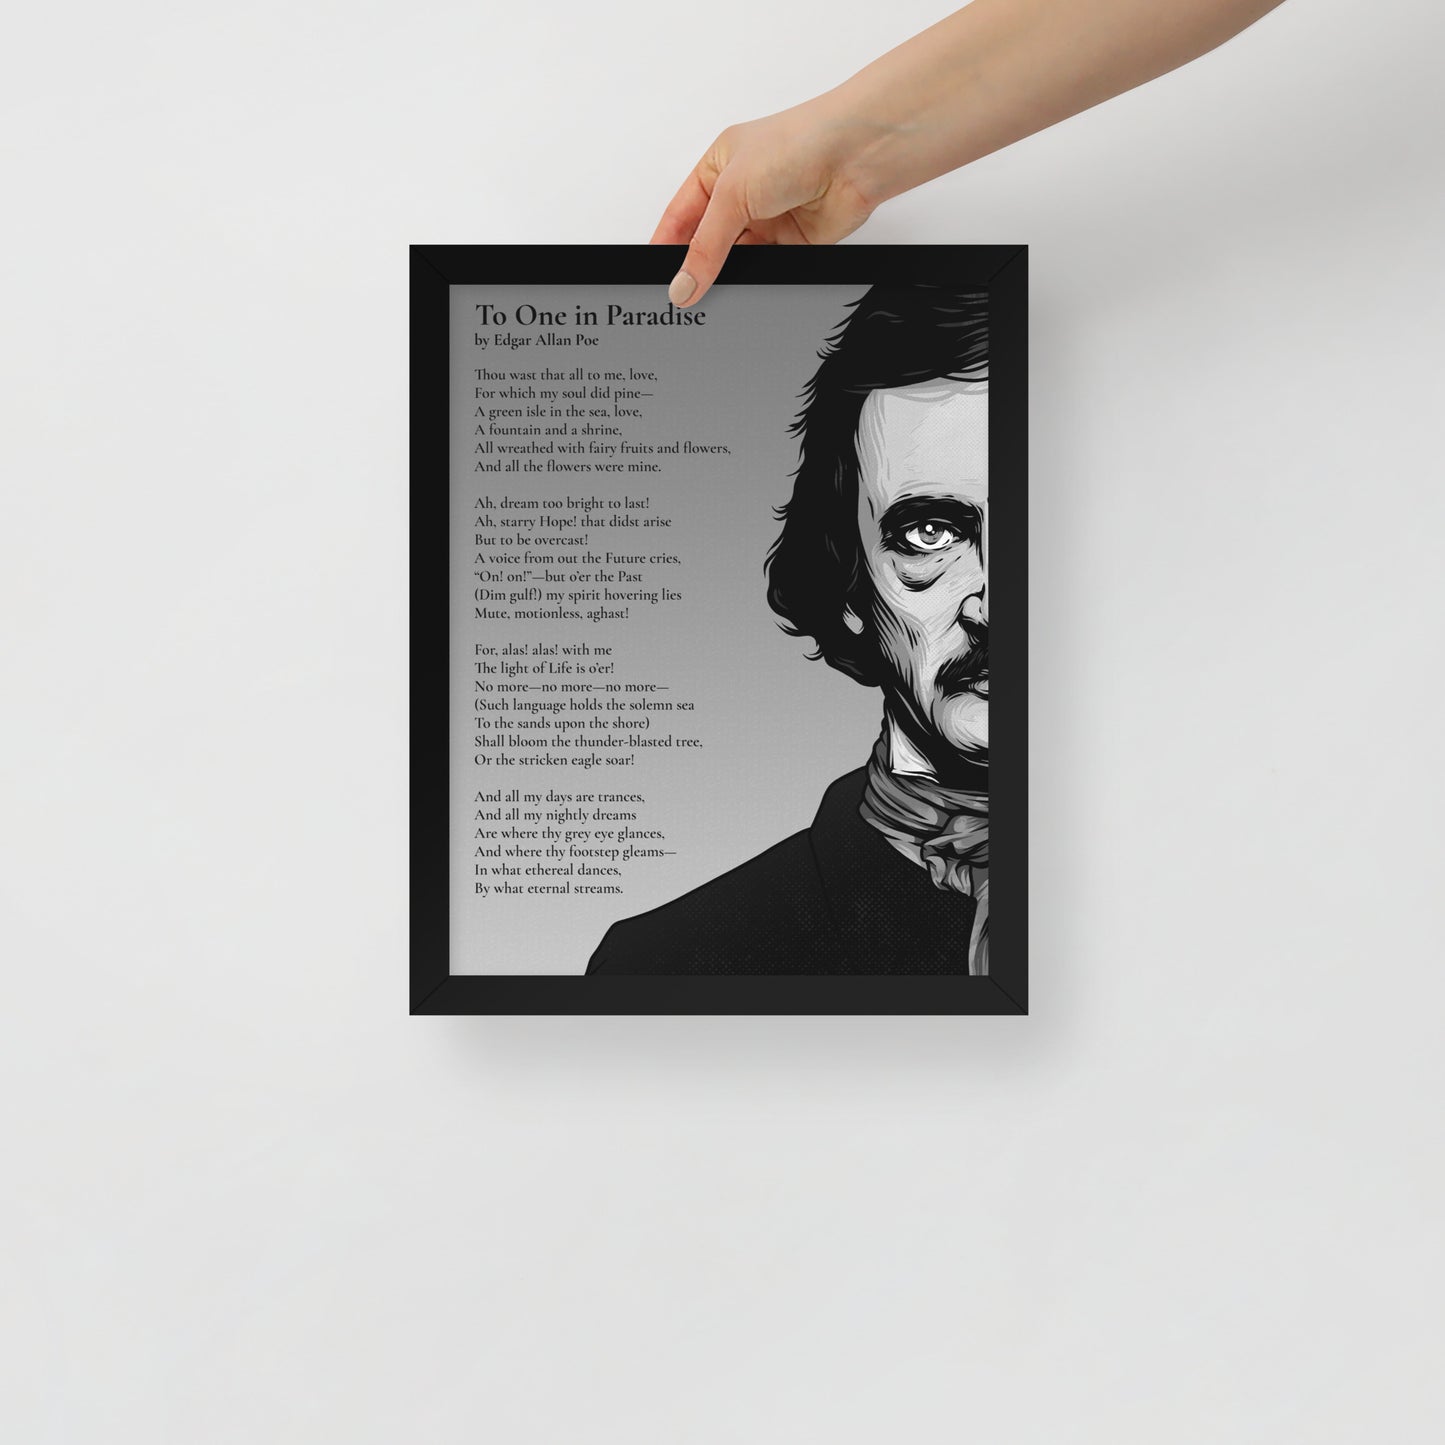 Edgar Allan Poe's 'To One in Paradise' Framed Matted Poster - 11 x 14 Black Frame